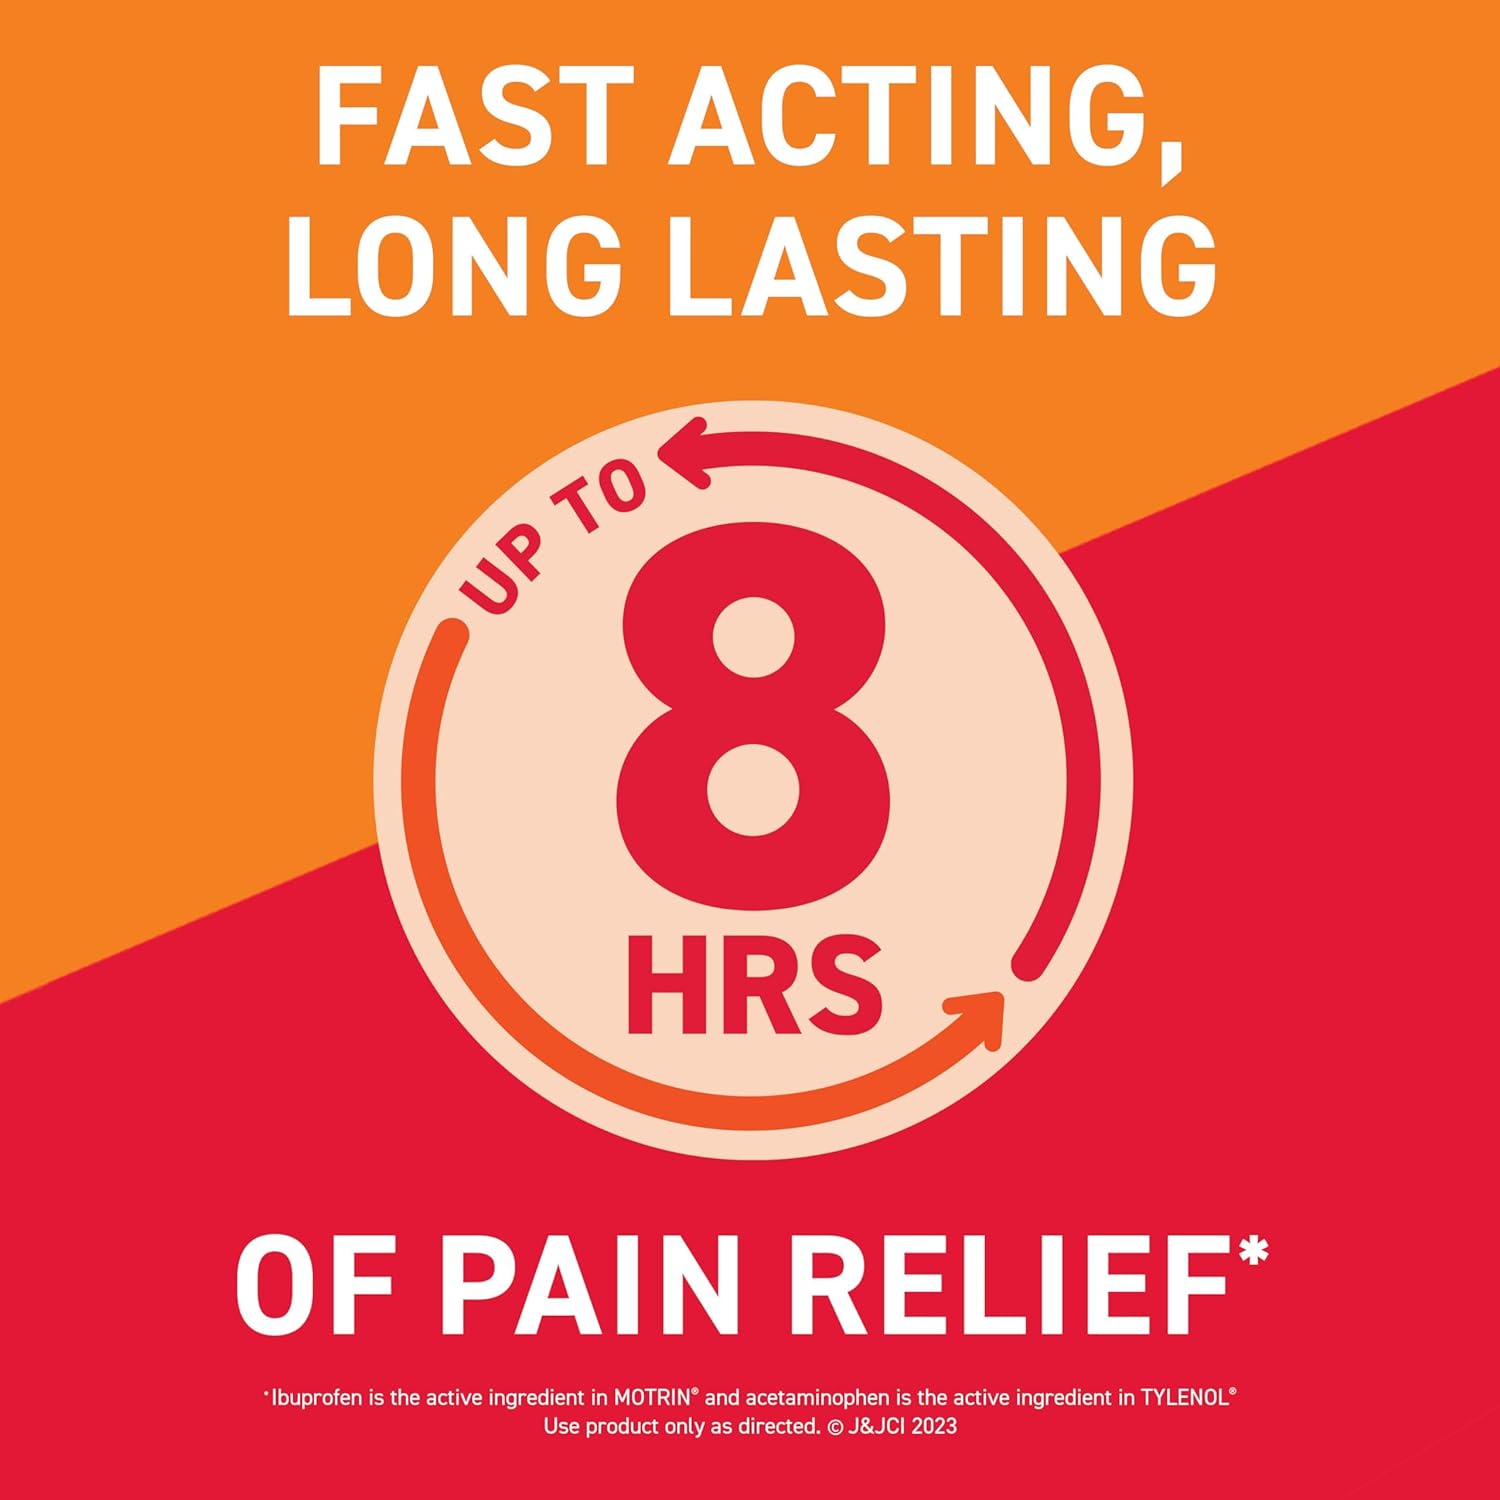 Motrin Dual Action with Tylenol, Dual Action Pain Reliever with Ibuprofen & Acetaminophen, Two Medicines for Minor Aches & Pains, Ibuprofen (NSAID) 125 mg & Acetaminophen 250 mg, 80 ct : Health & Household